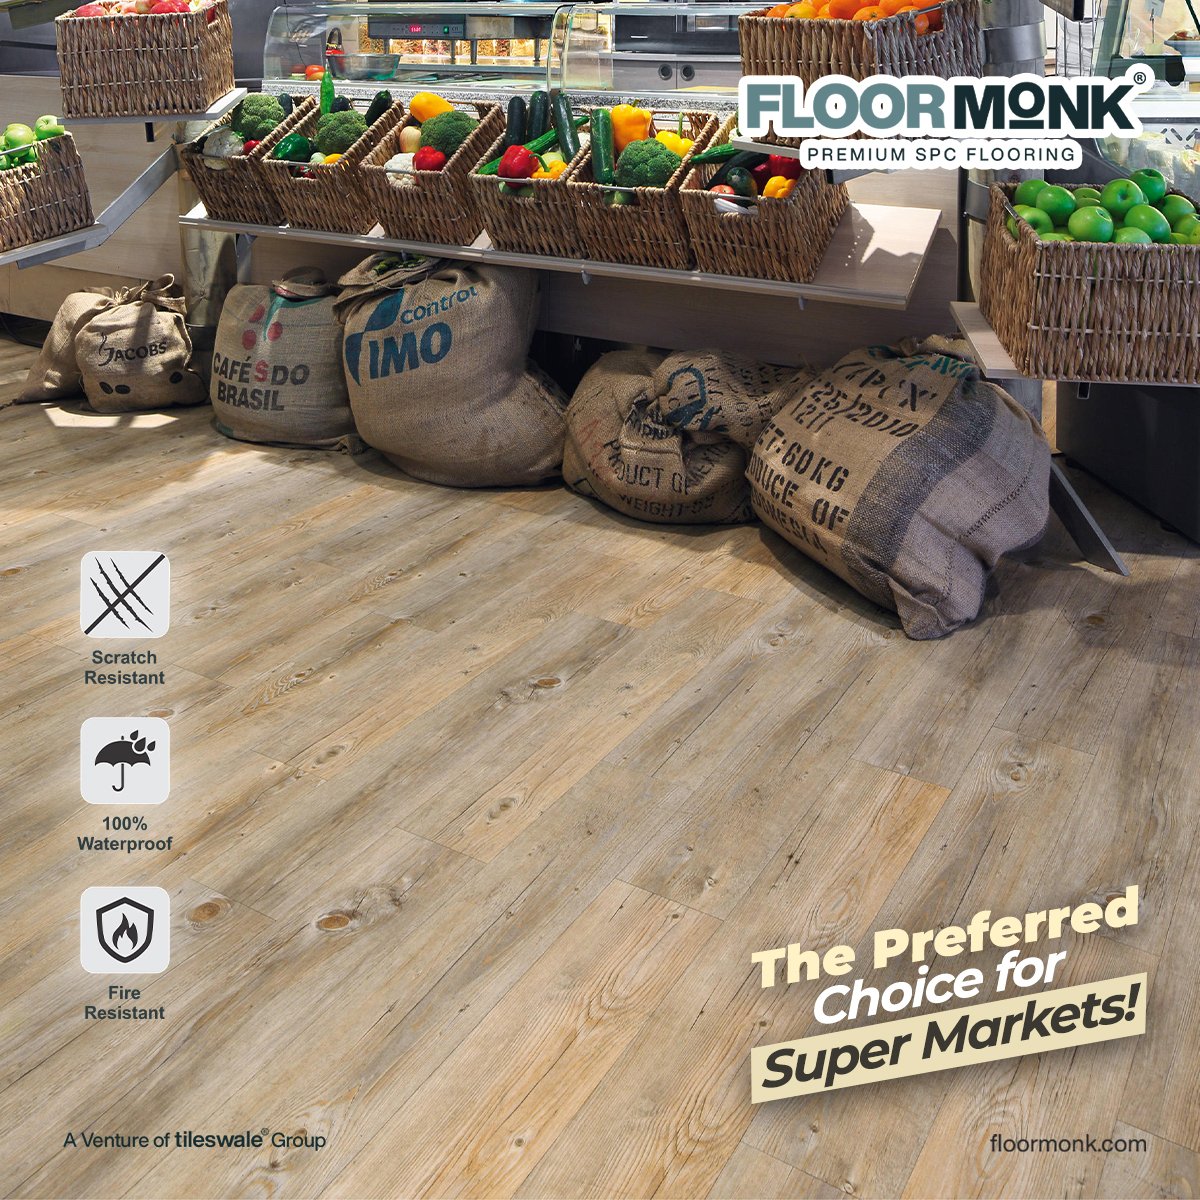 Superior Flooring for Supermarkets! Looking for the perfect flooring choice? SPC has got it all – waterproof, fire-resistant, scratch-resistant, and non-slippery!

Visit us:- floormonk.com

#supermarket #supermarketfinds #supermarketfood #supermarketfloor